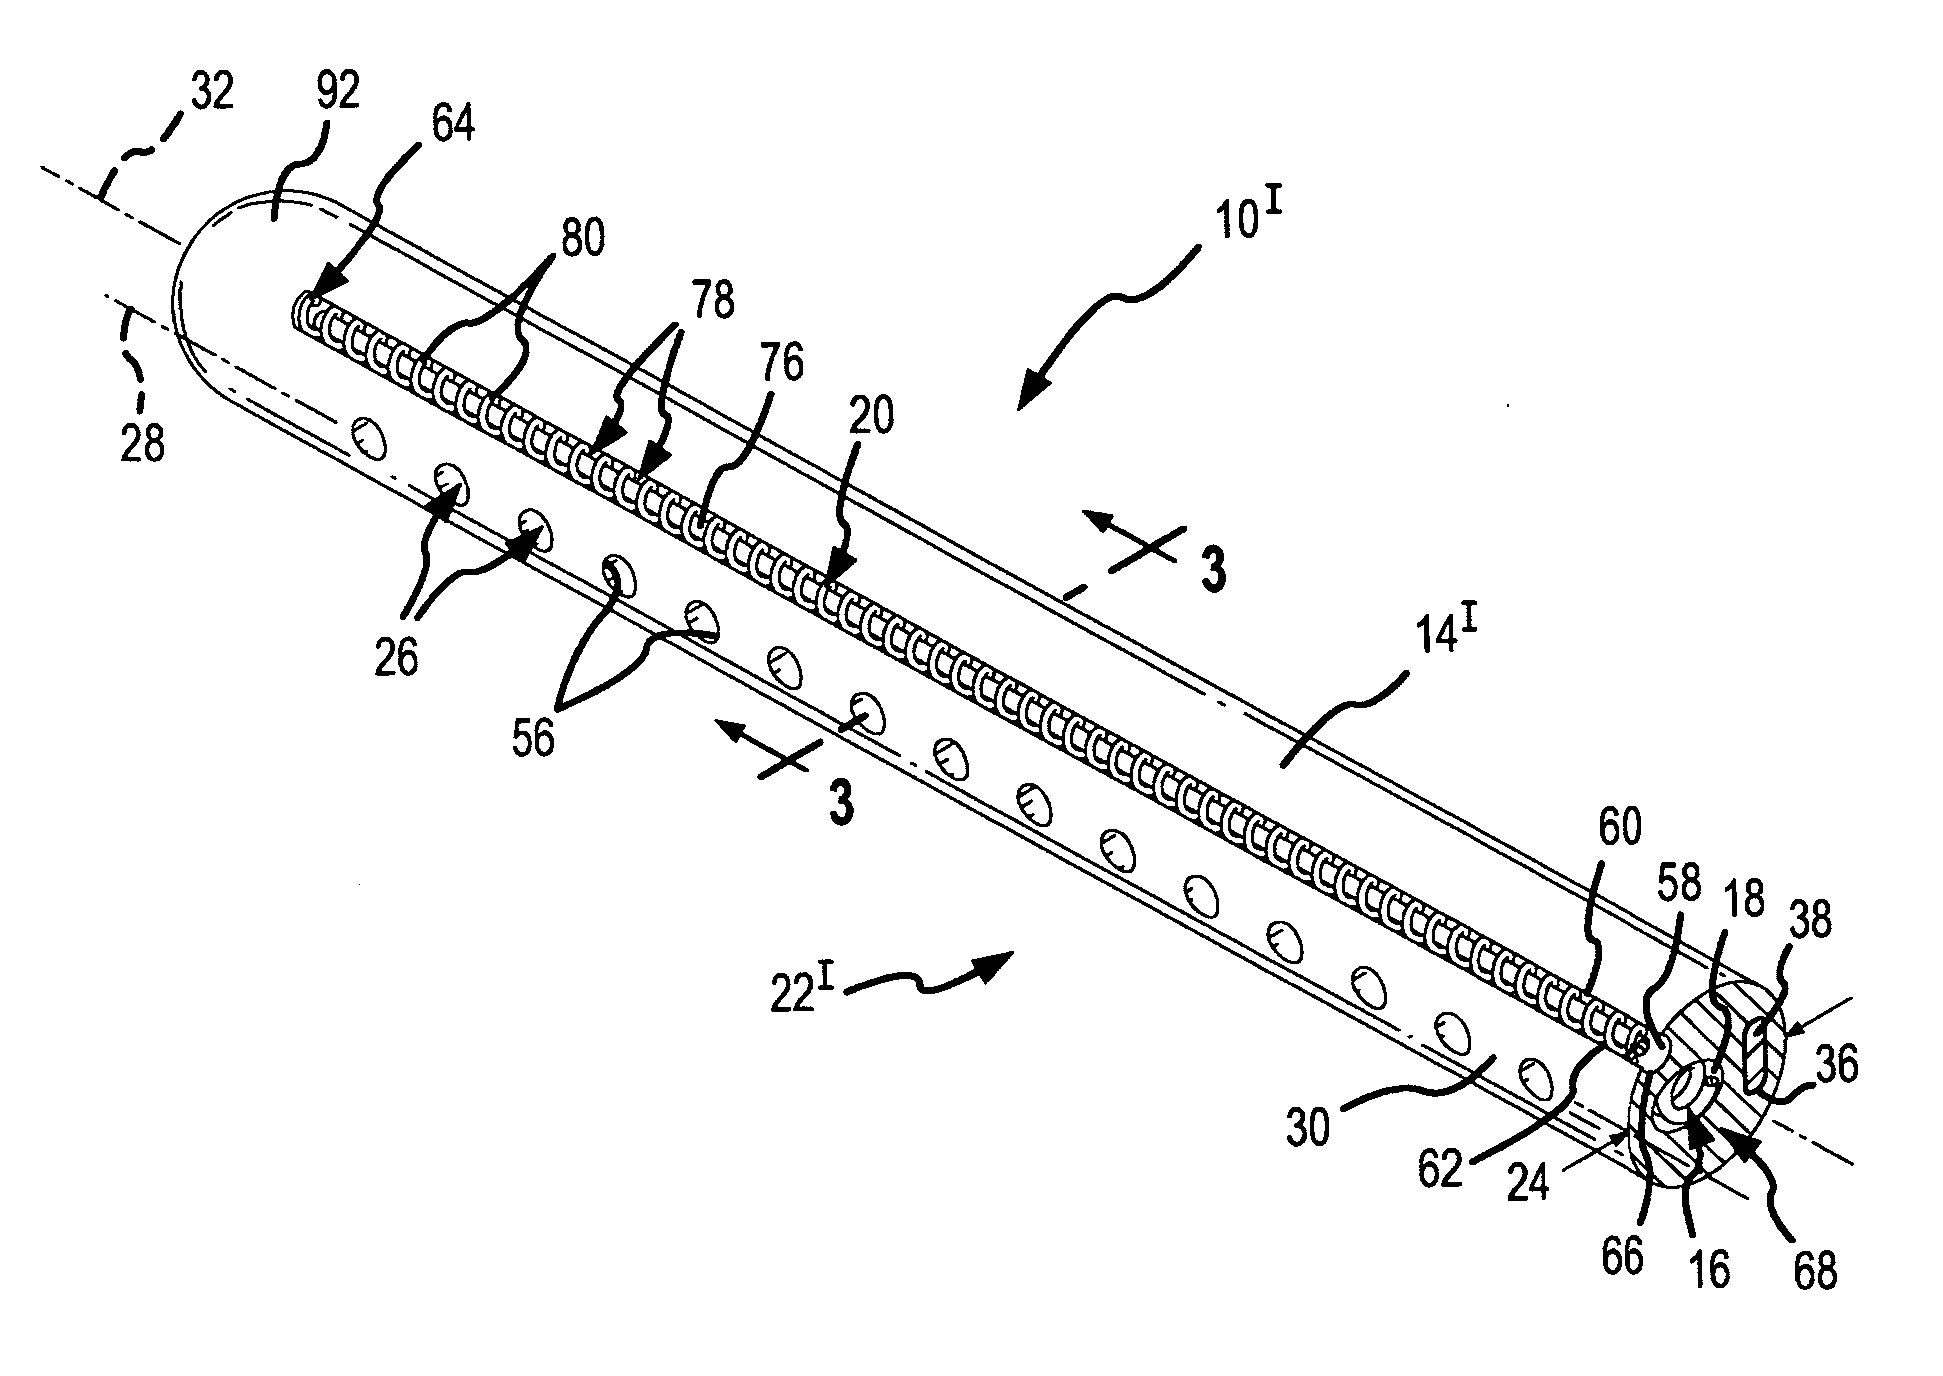 Multipolar, virtual-electrode catheter with at least one surface electrode and method for ablation